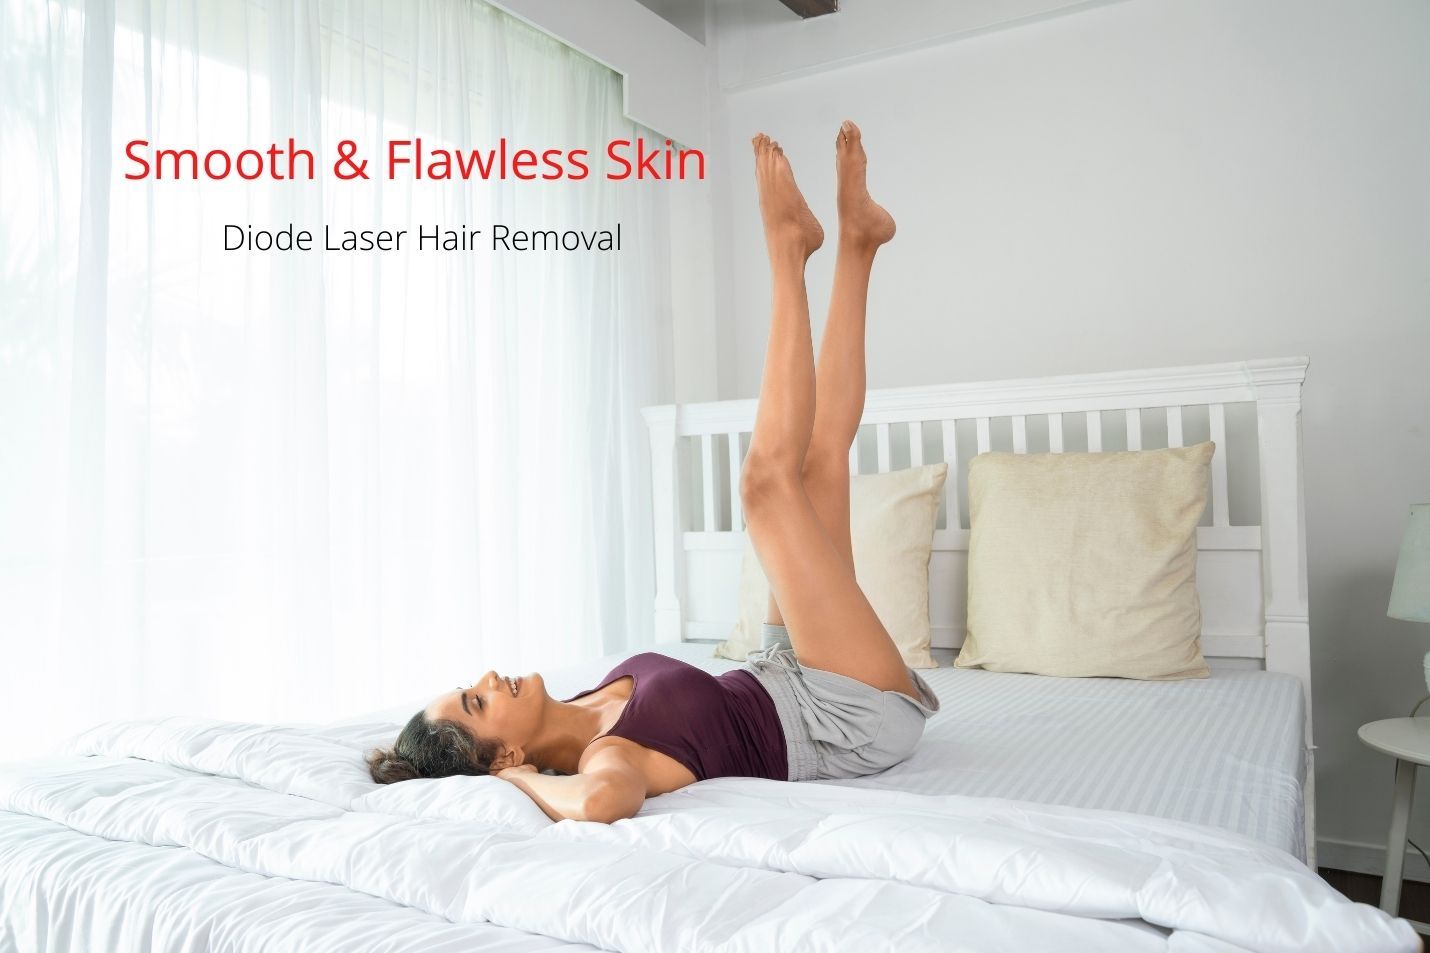 Smooth and Flawless Skin Using Diode Laser Hair Removal